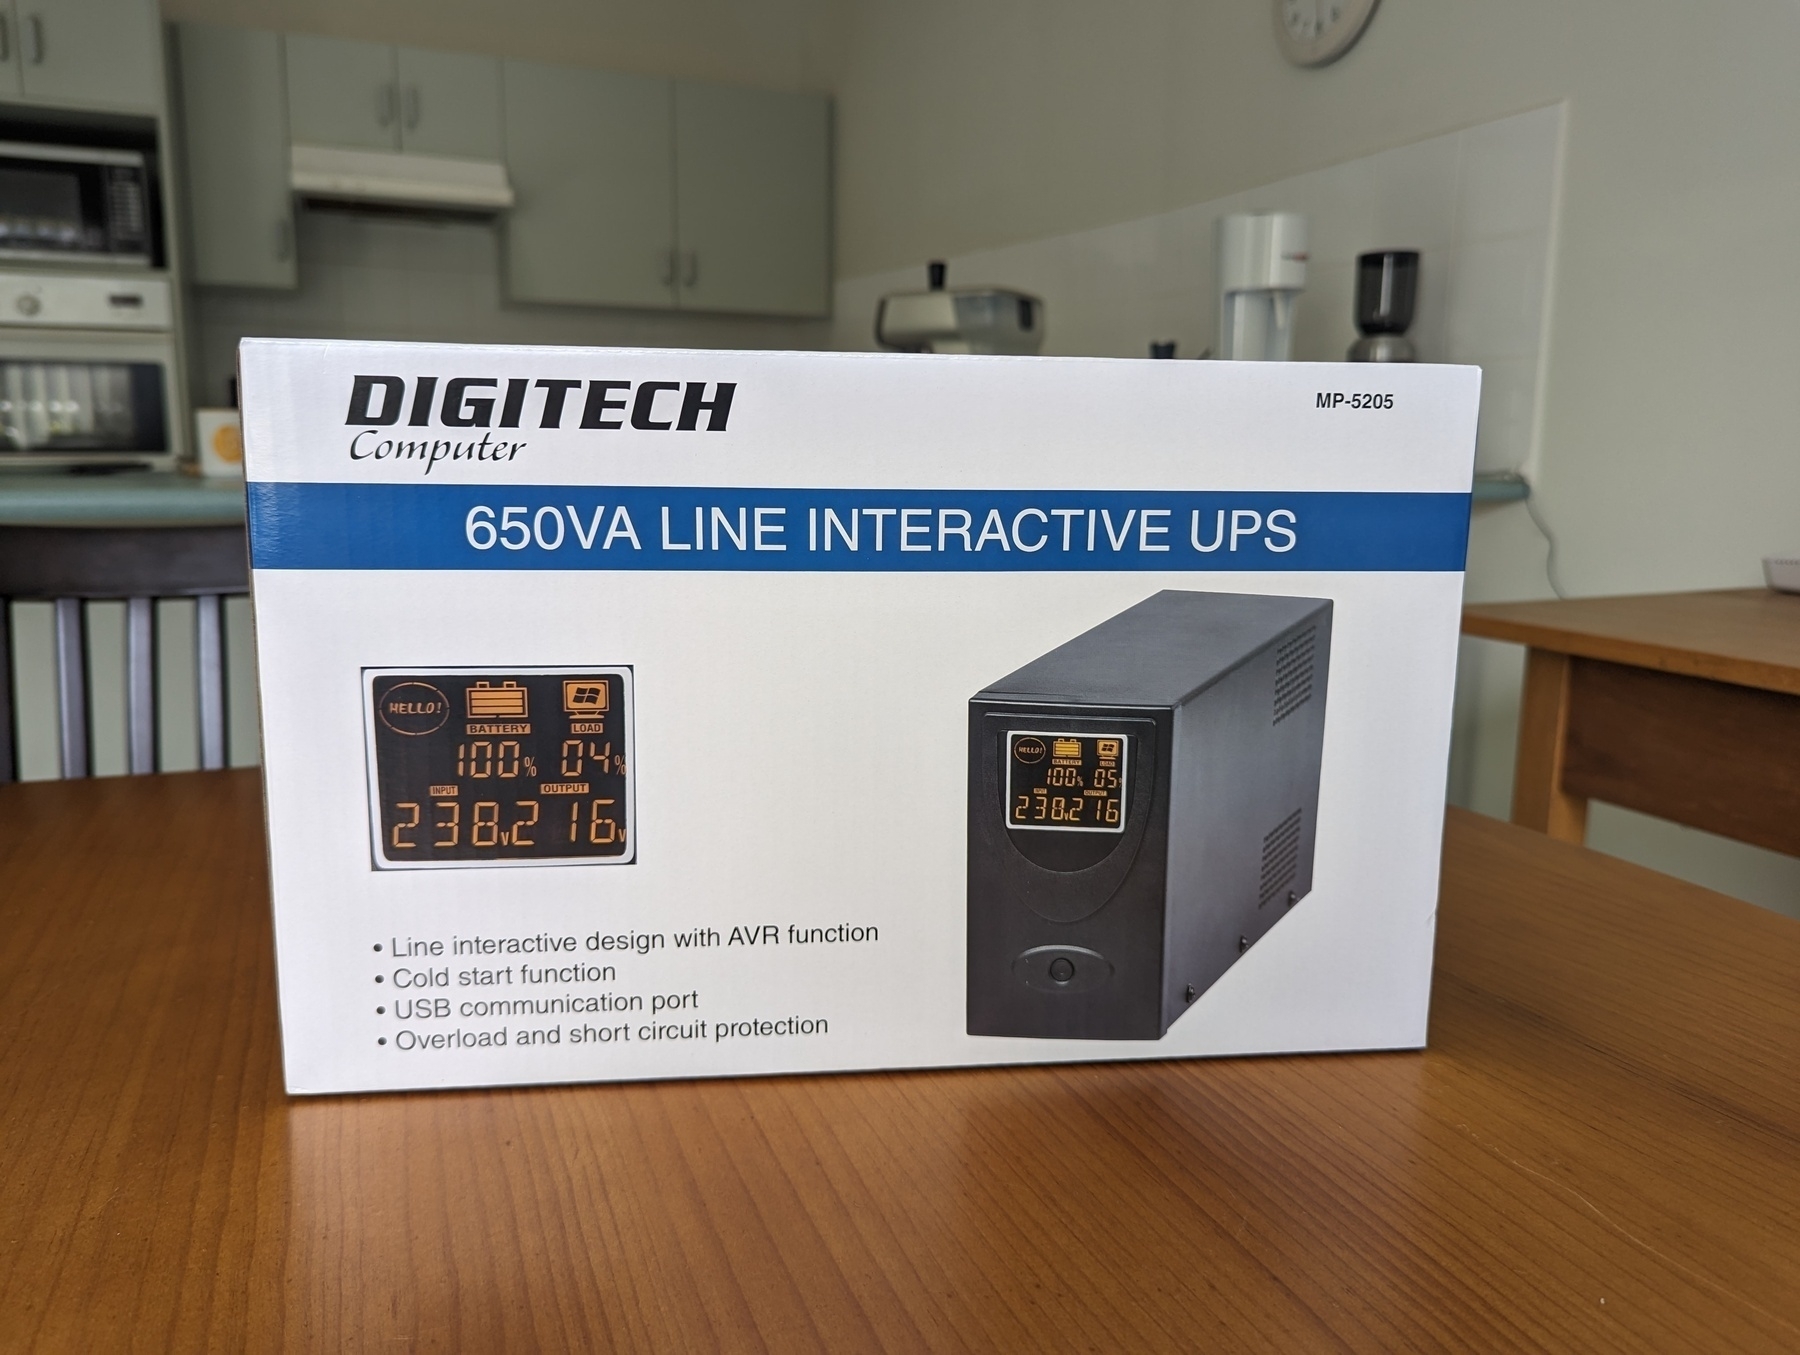 A box containing a Digitech 650VA Line Interactive Uninterruptible Power Supply (UPS) is placed on a wooden kitchen table.